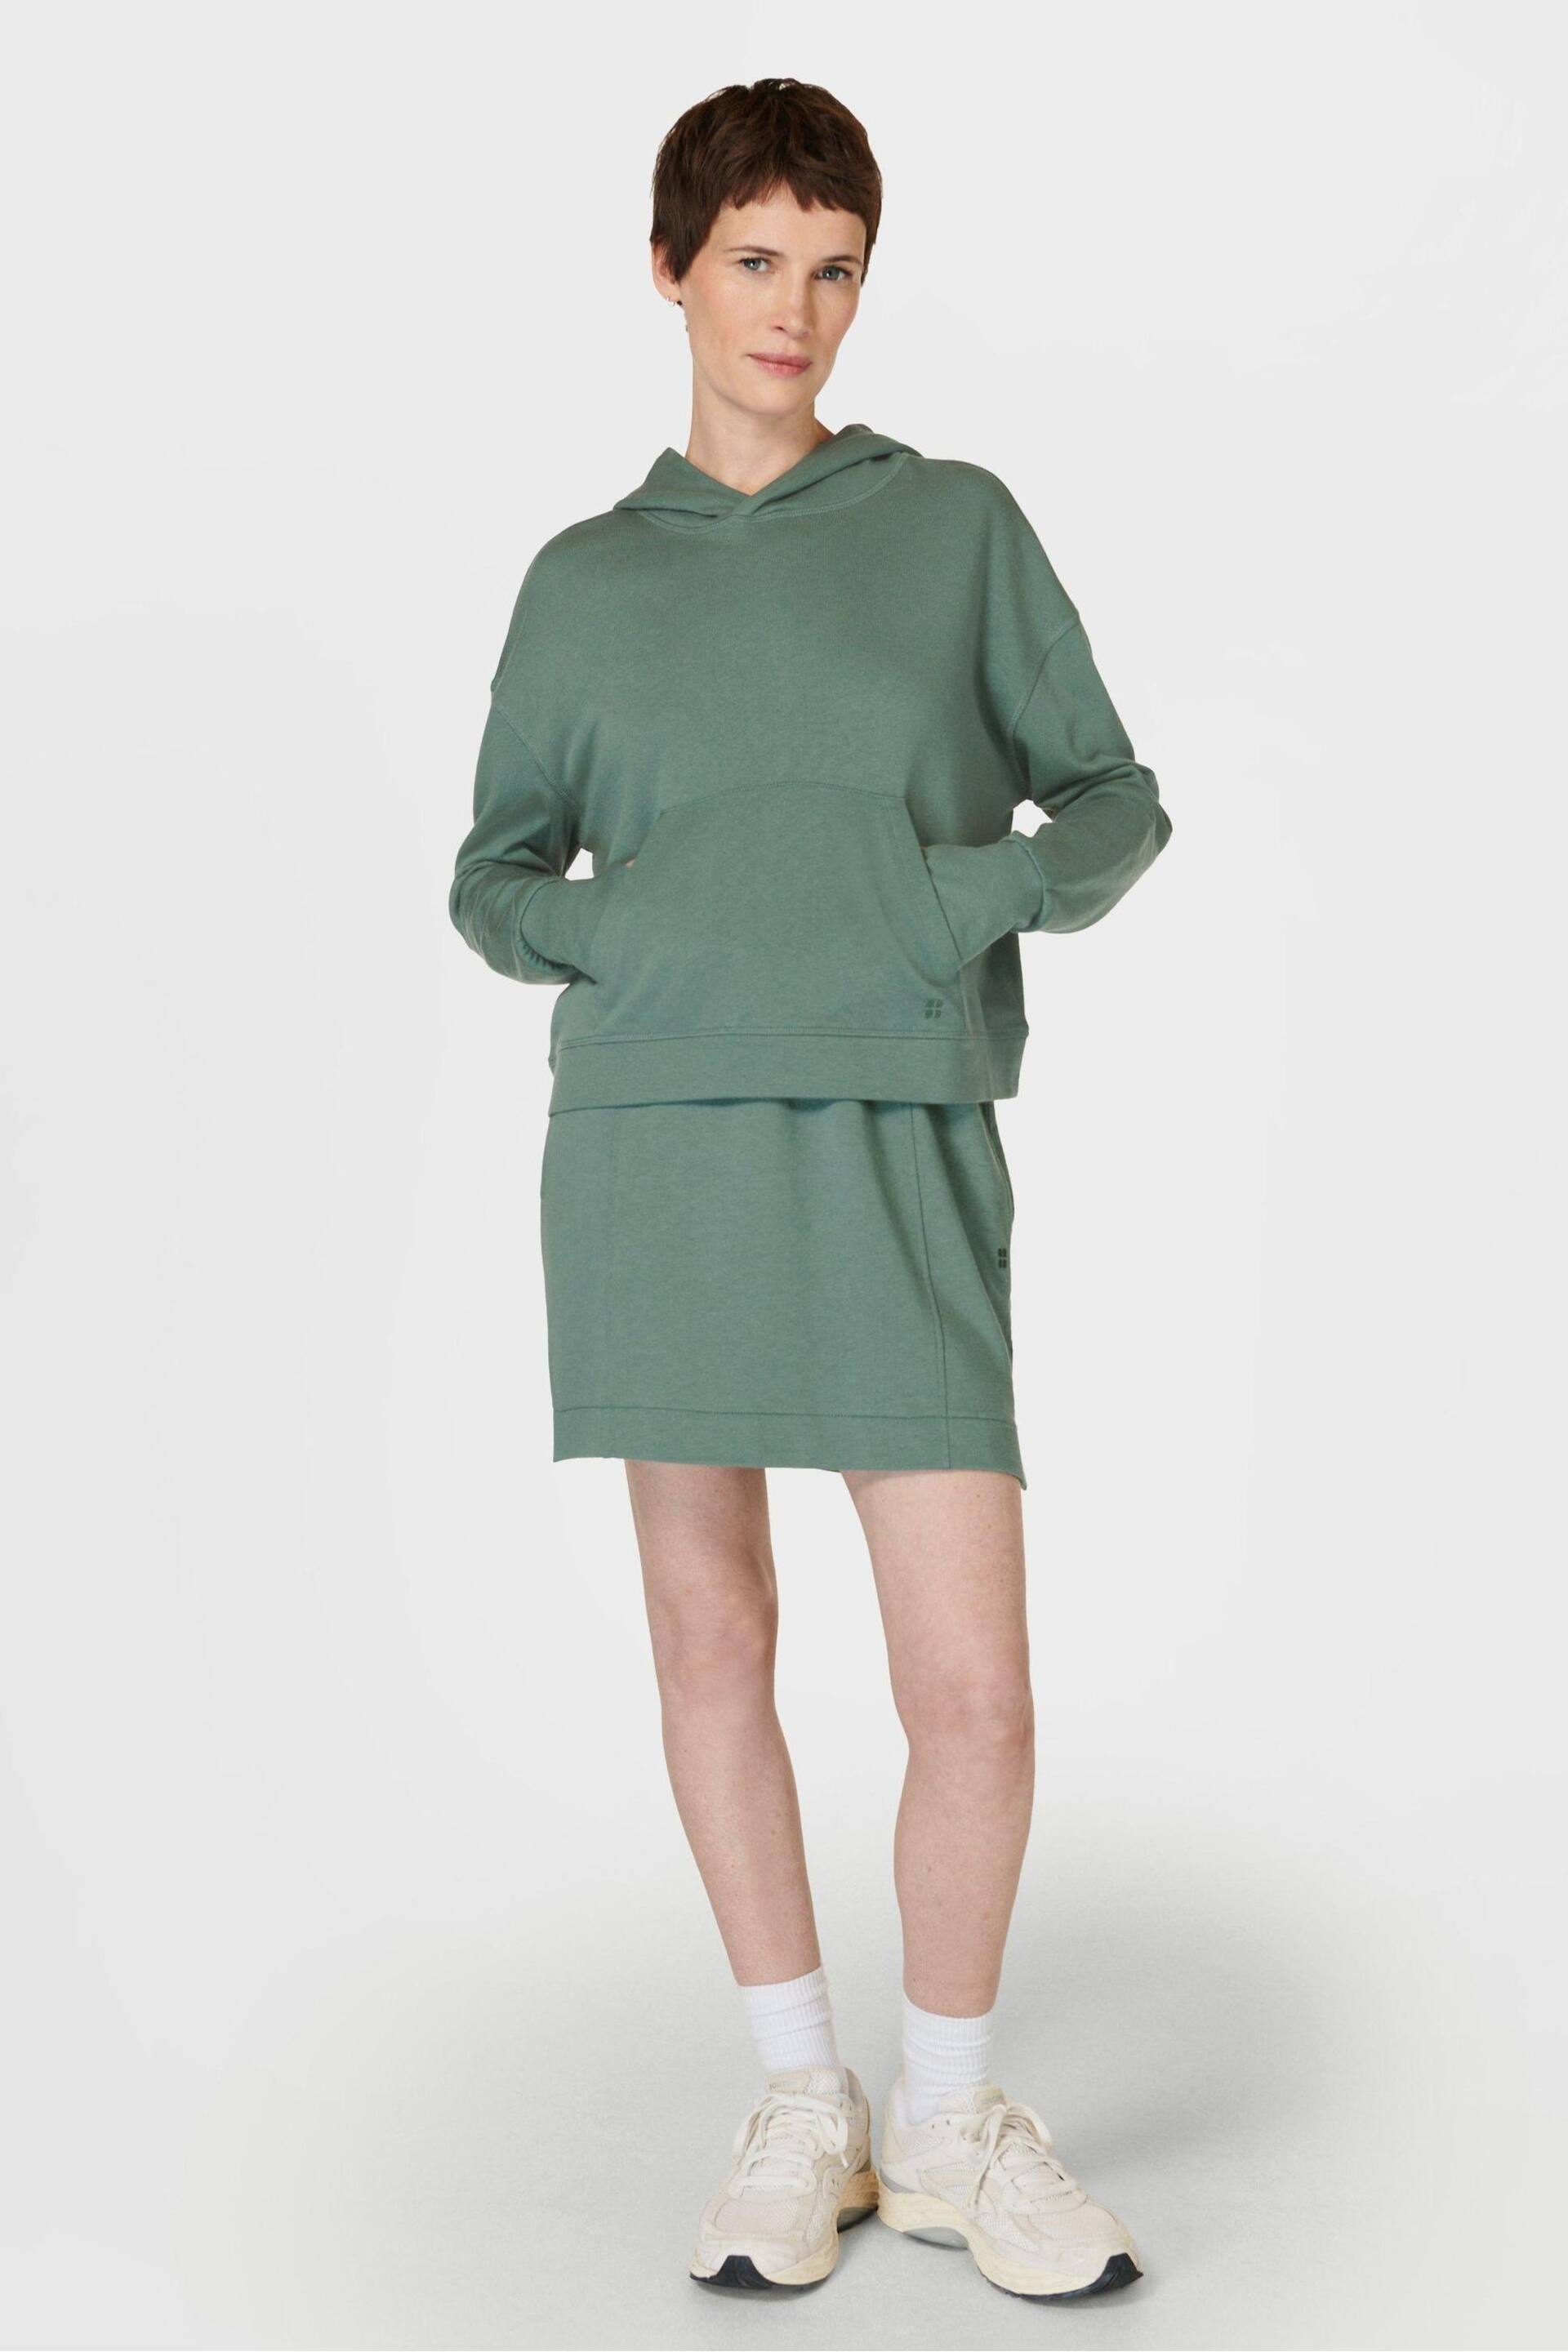 Sweaty Betty Cool Forest Green After Class Hoodie - Image 6 of 7